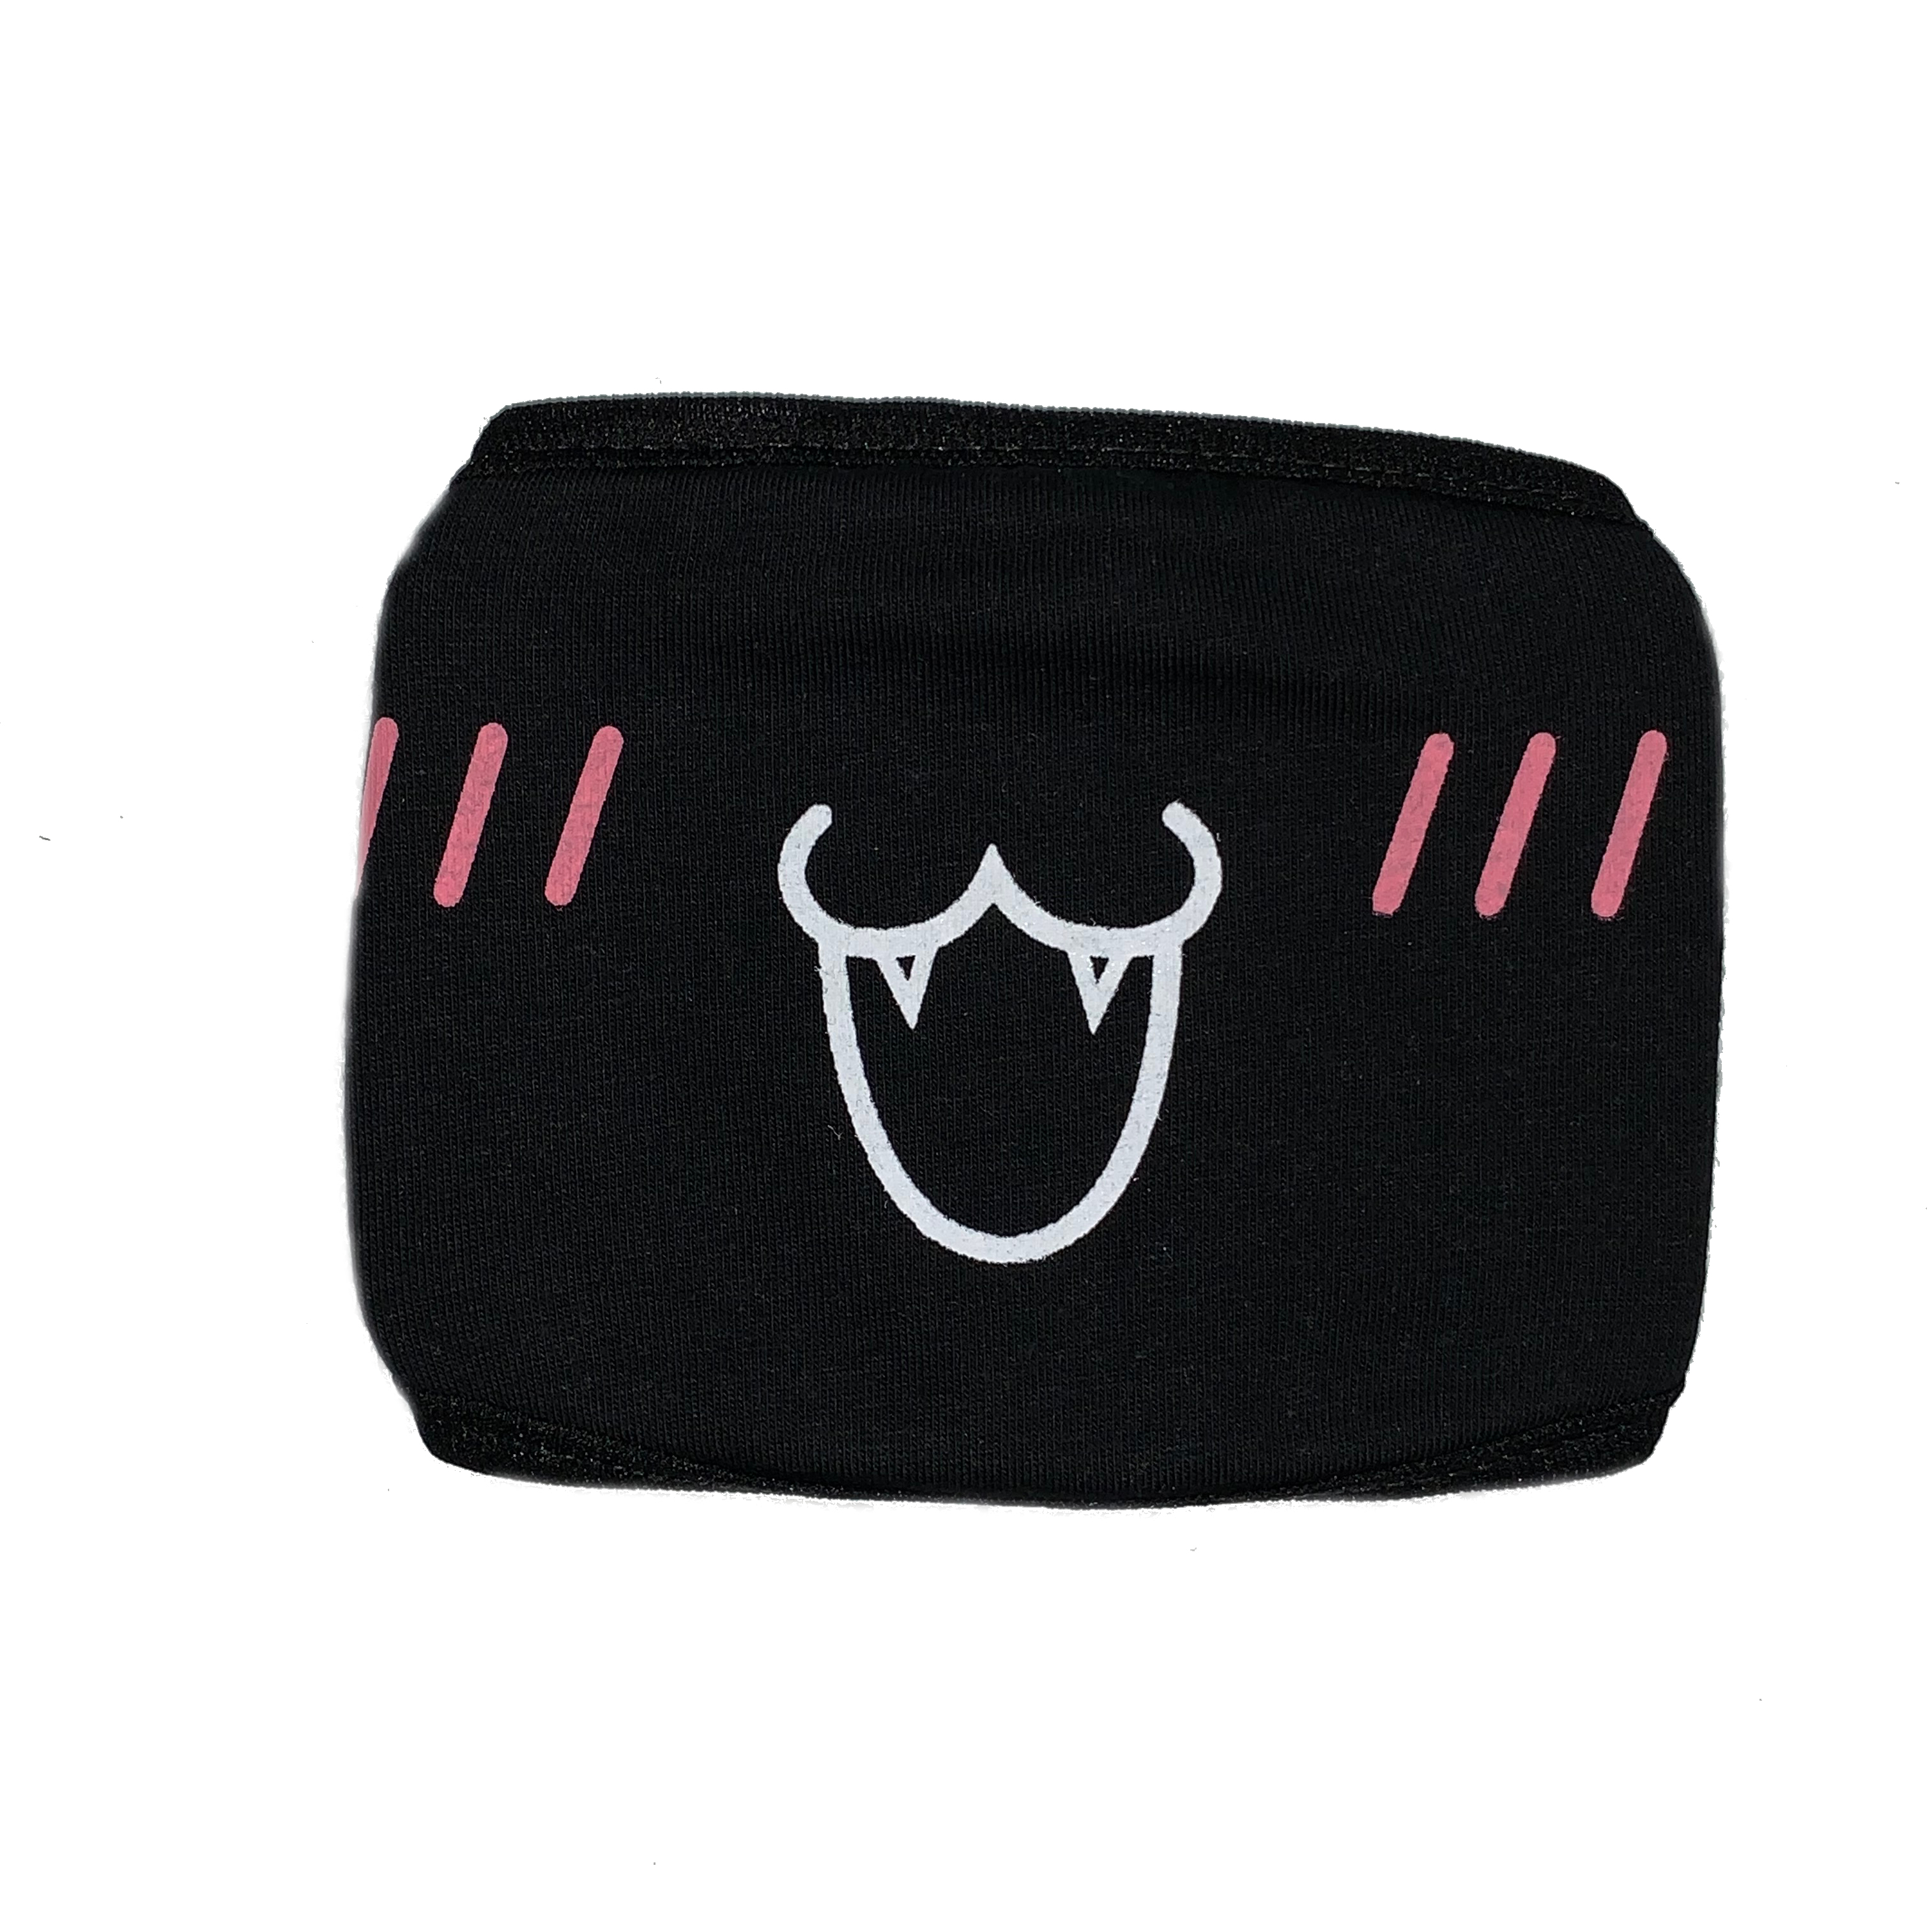 Cosplay Mask Face Mouth Mask Anime Cat Face Black One Size Fits Most